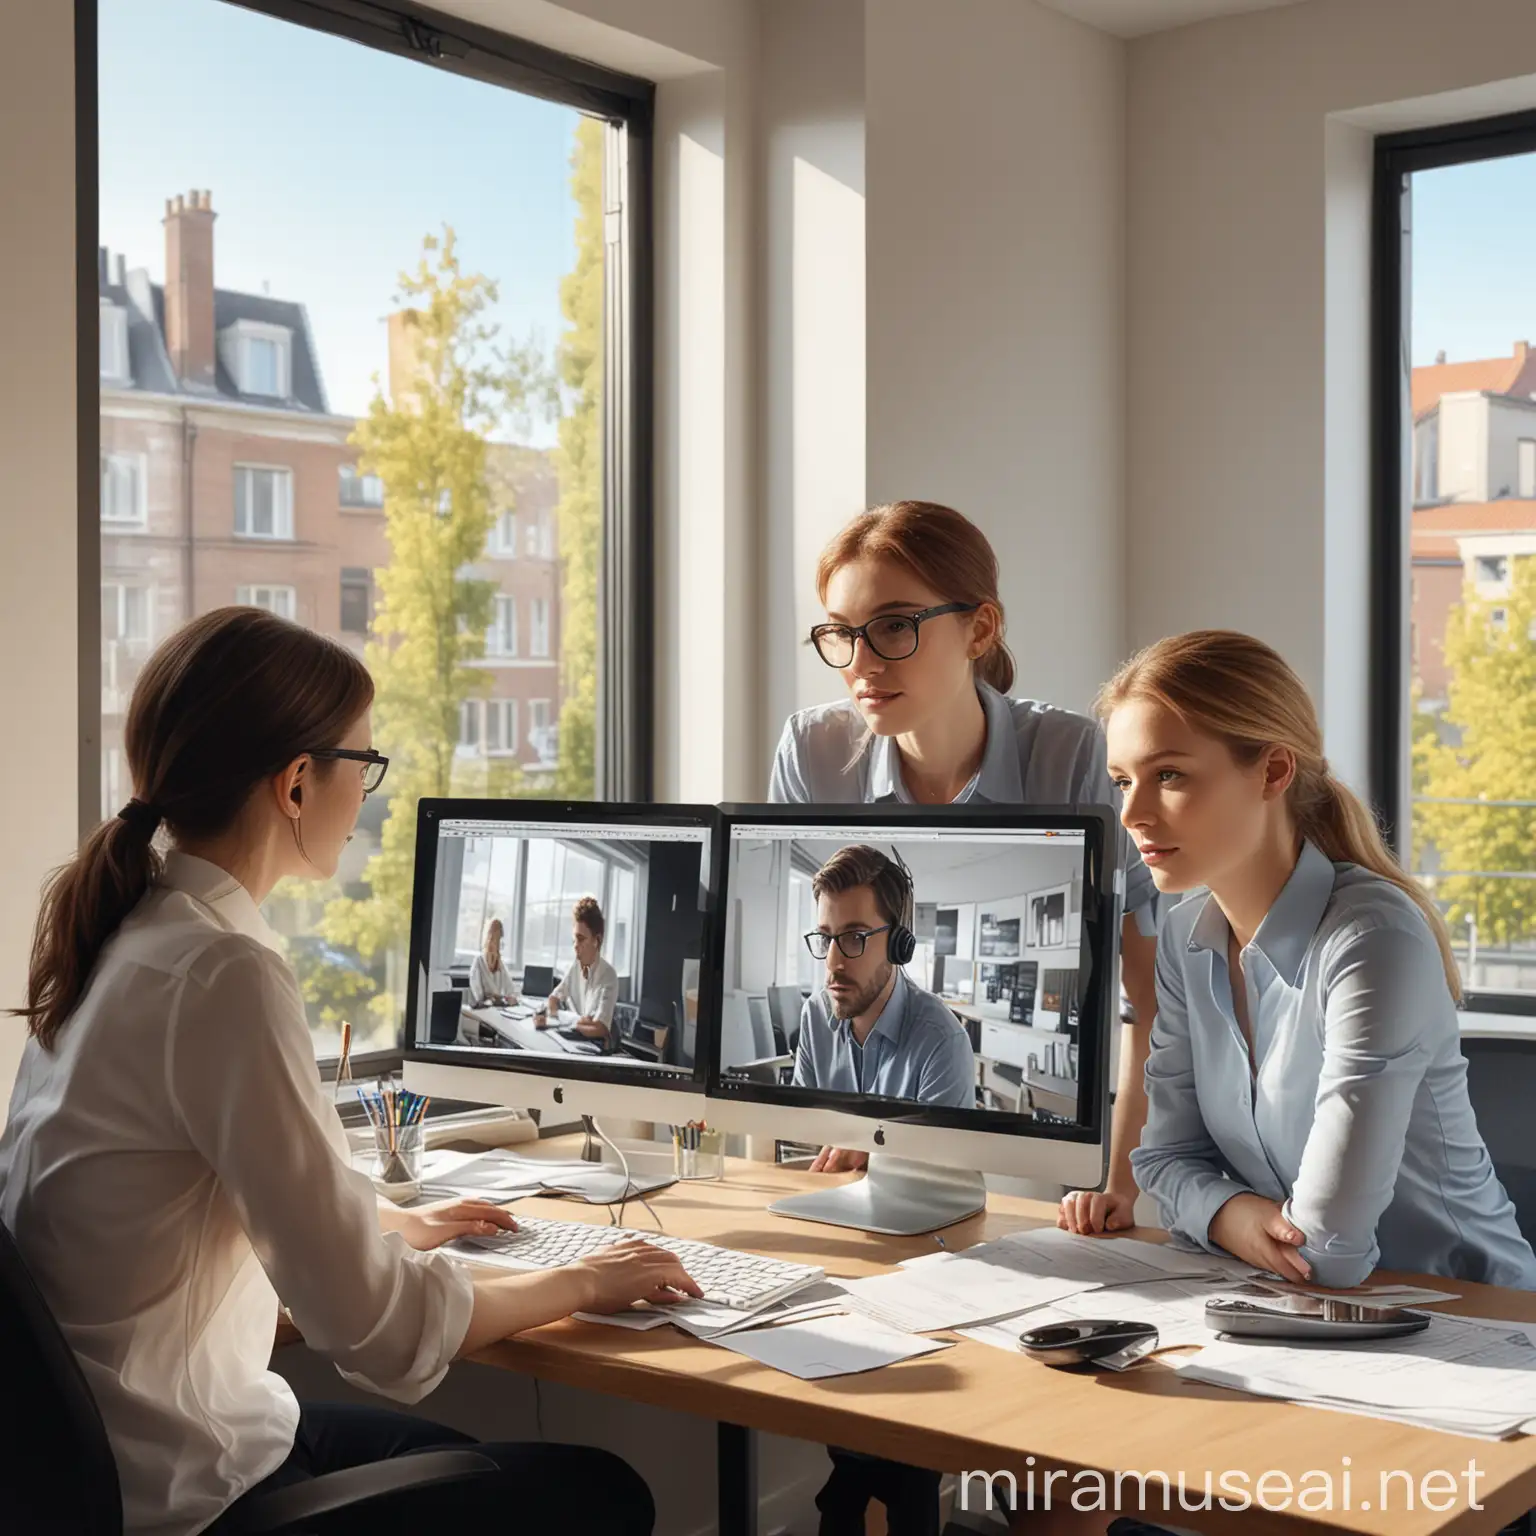 3 people in the office look at the monitor in realism style, outside the window on a sunny day STYLE - REALISM, as photo 